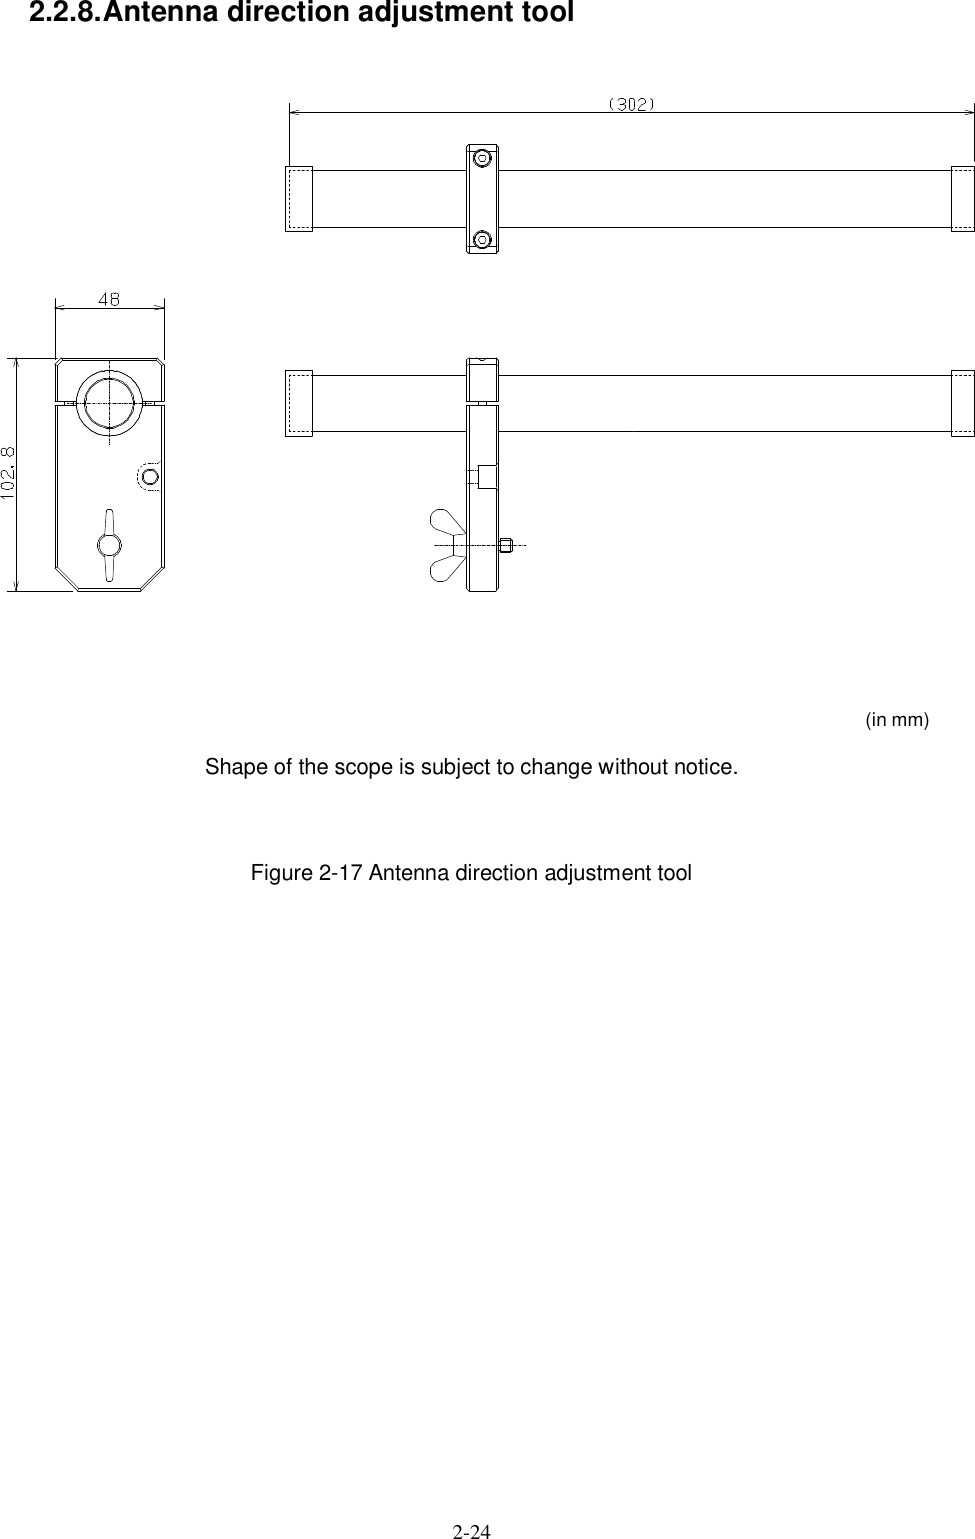  2-24   2.2.8. Antenna direction adjustment tool   (in mm) Shape of the scope is subject to change without notice.  Figure 2-17 Antenna direction adjustment tool  